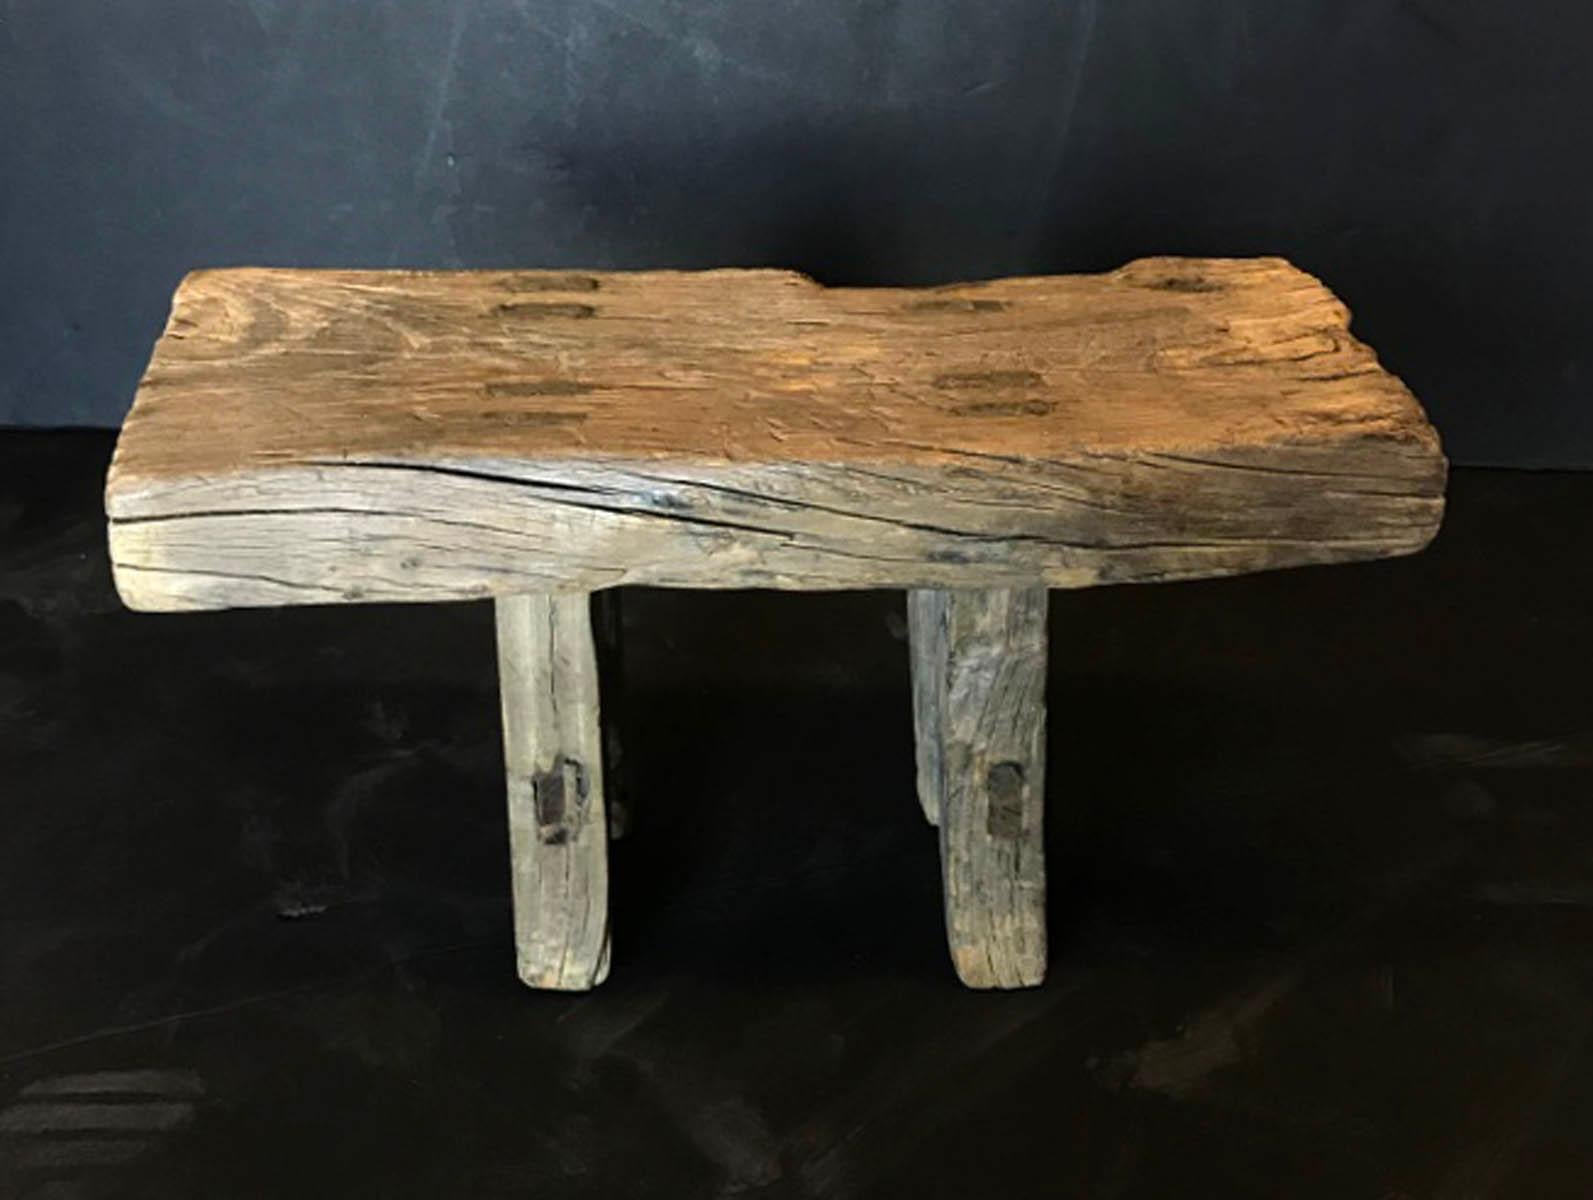 Antique Japanese elm stool with mortise and tenon construction. Great old weathered patina. Perfect for a plant stand or a small side table.